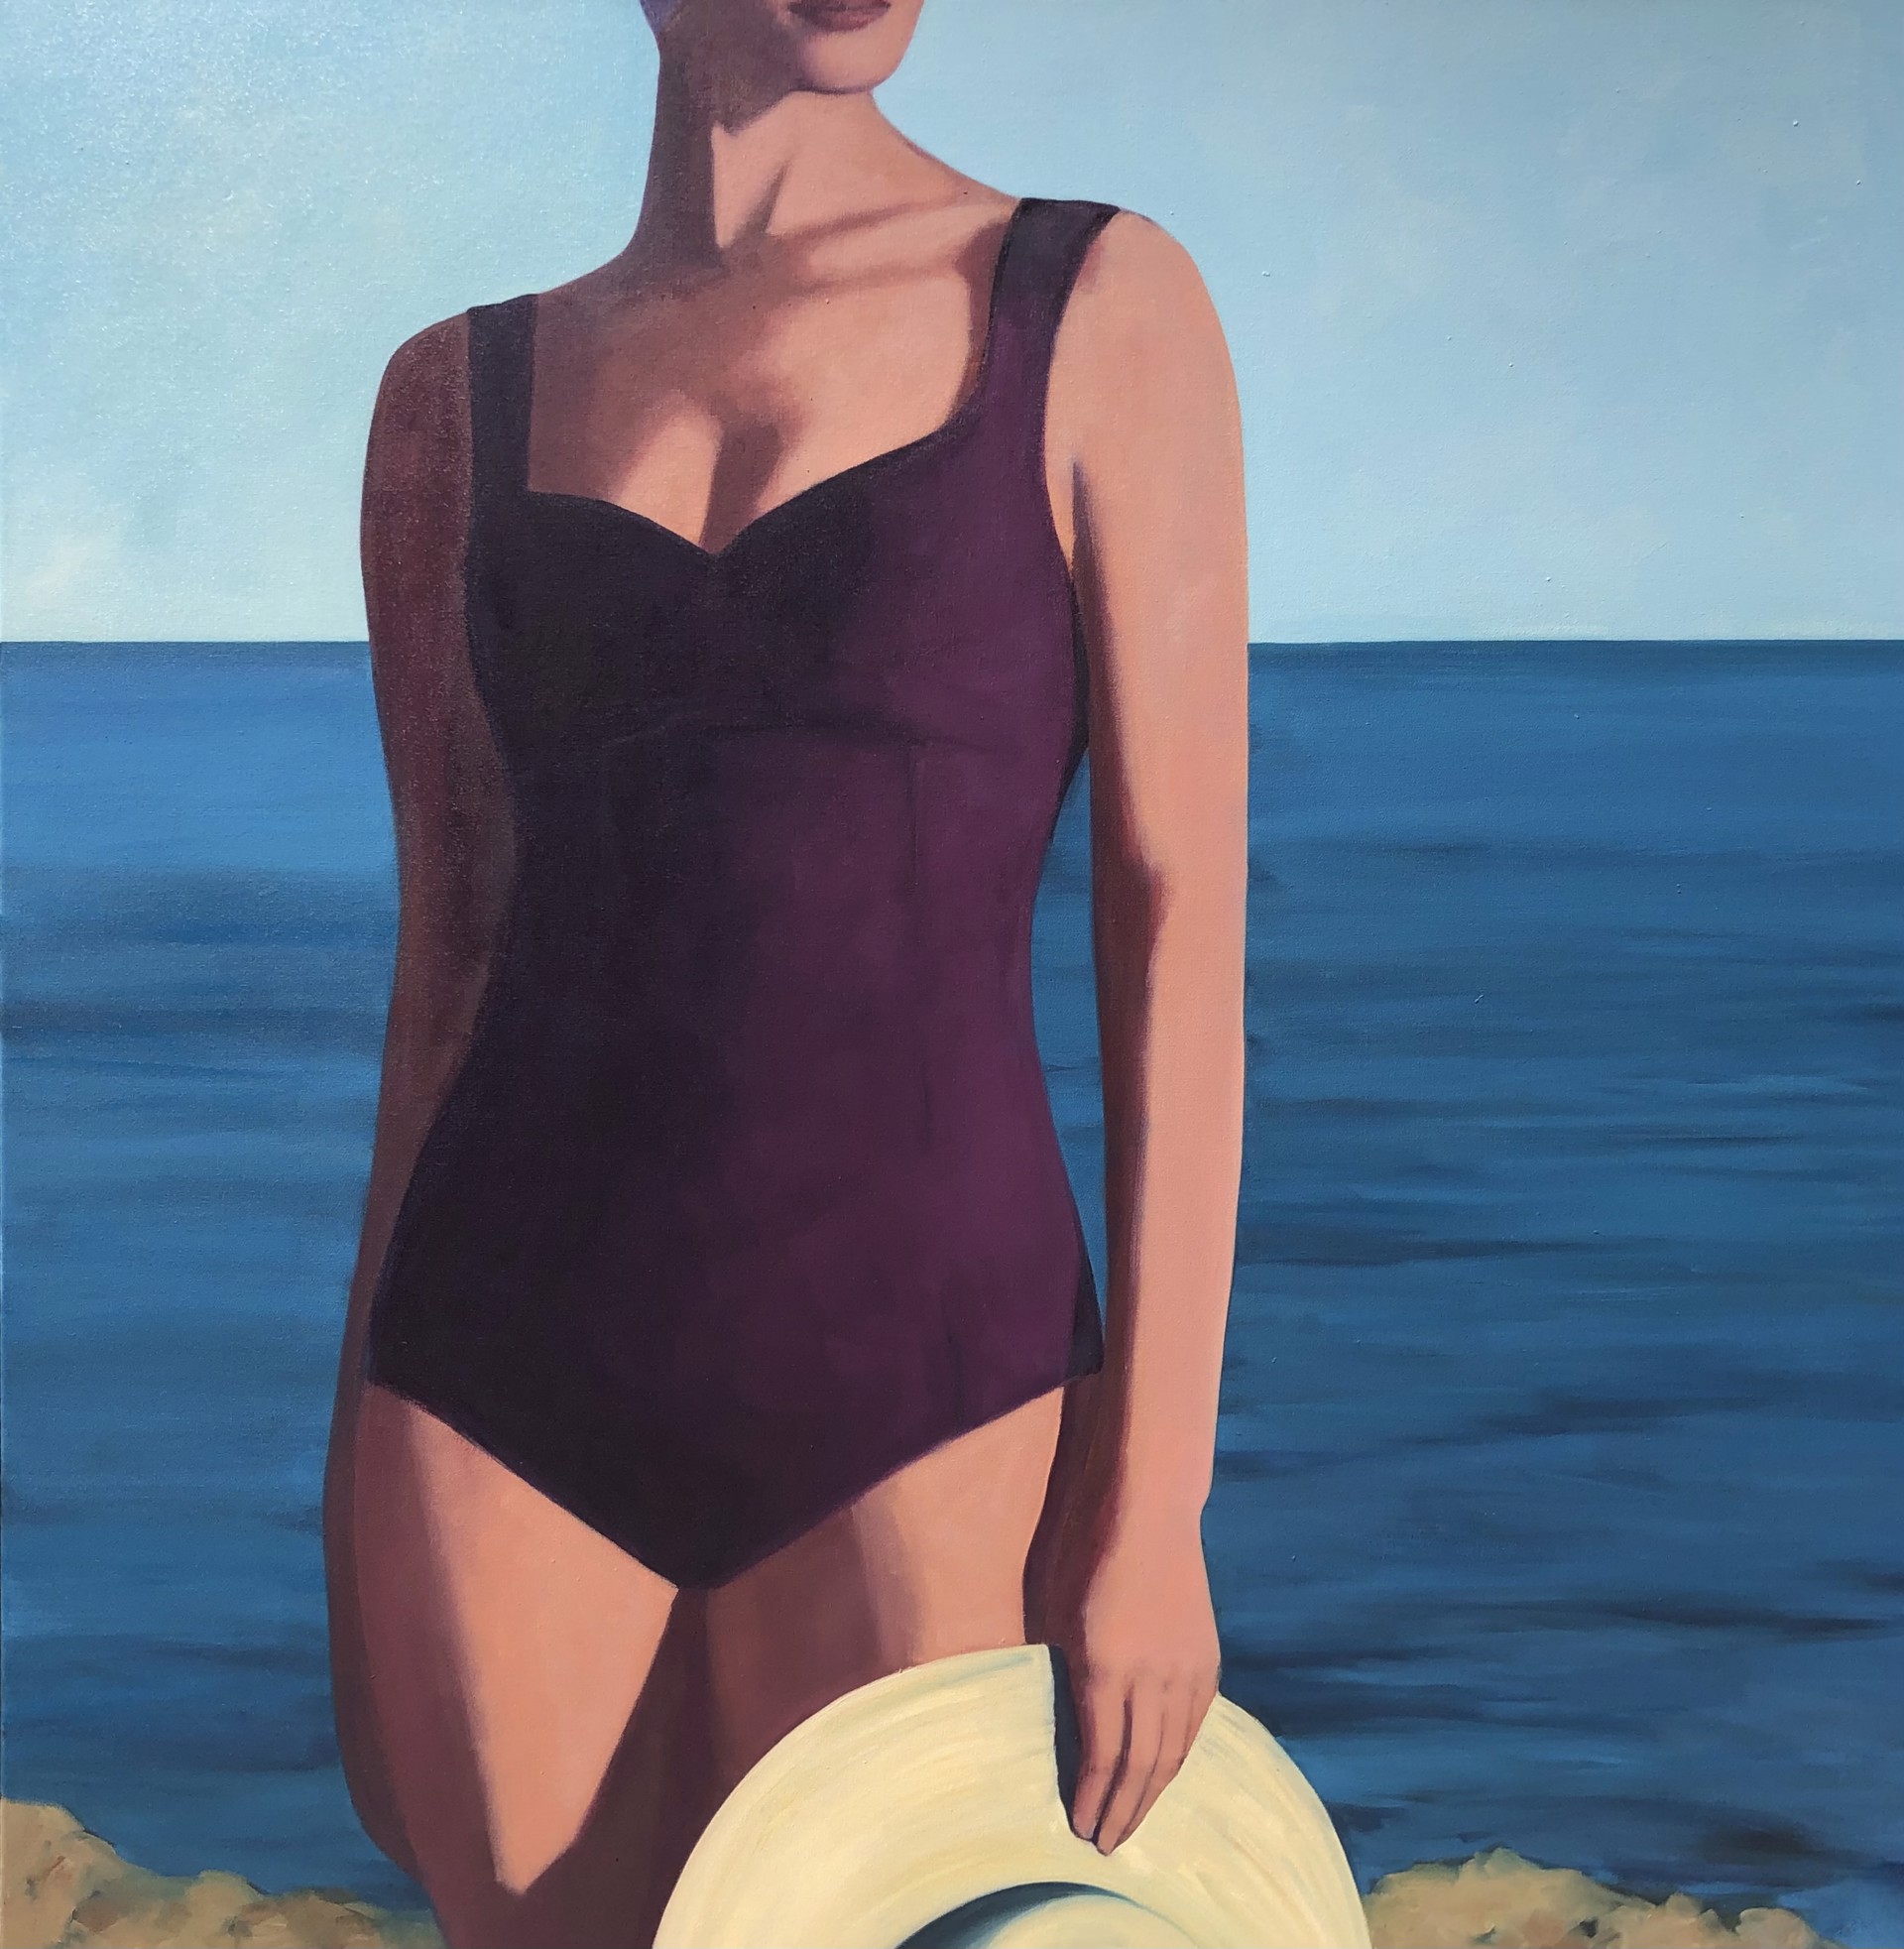 At The Shore by Tracey Sylvester Harris